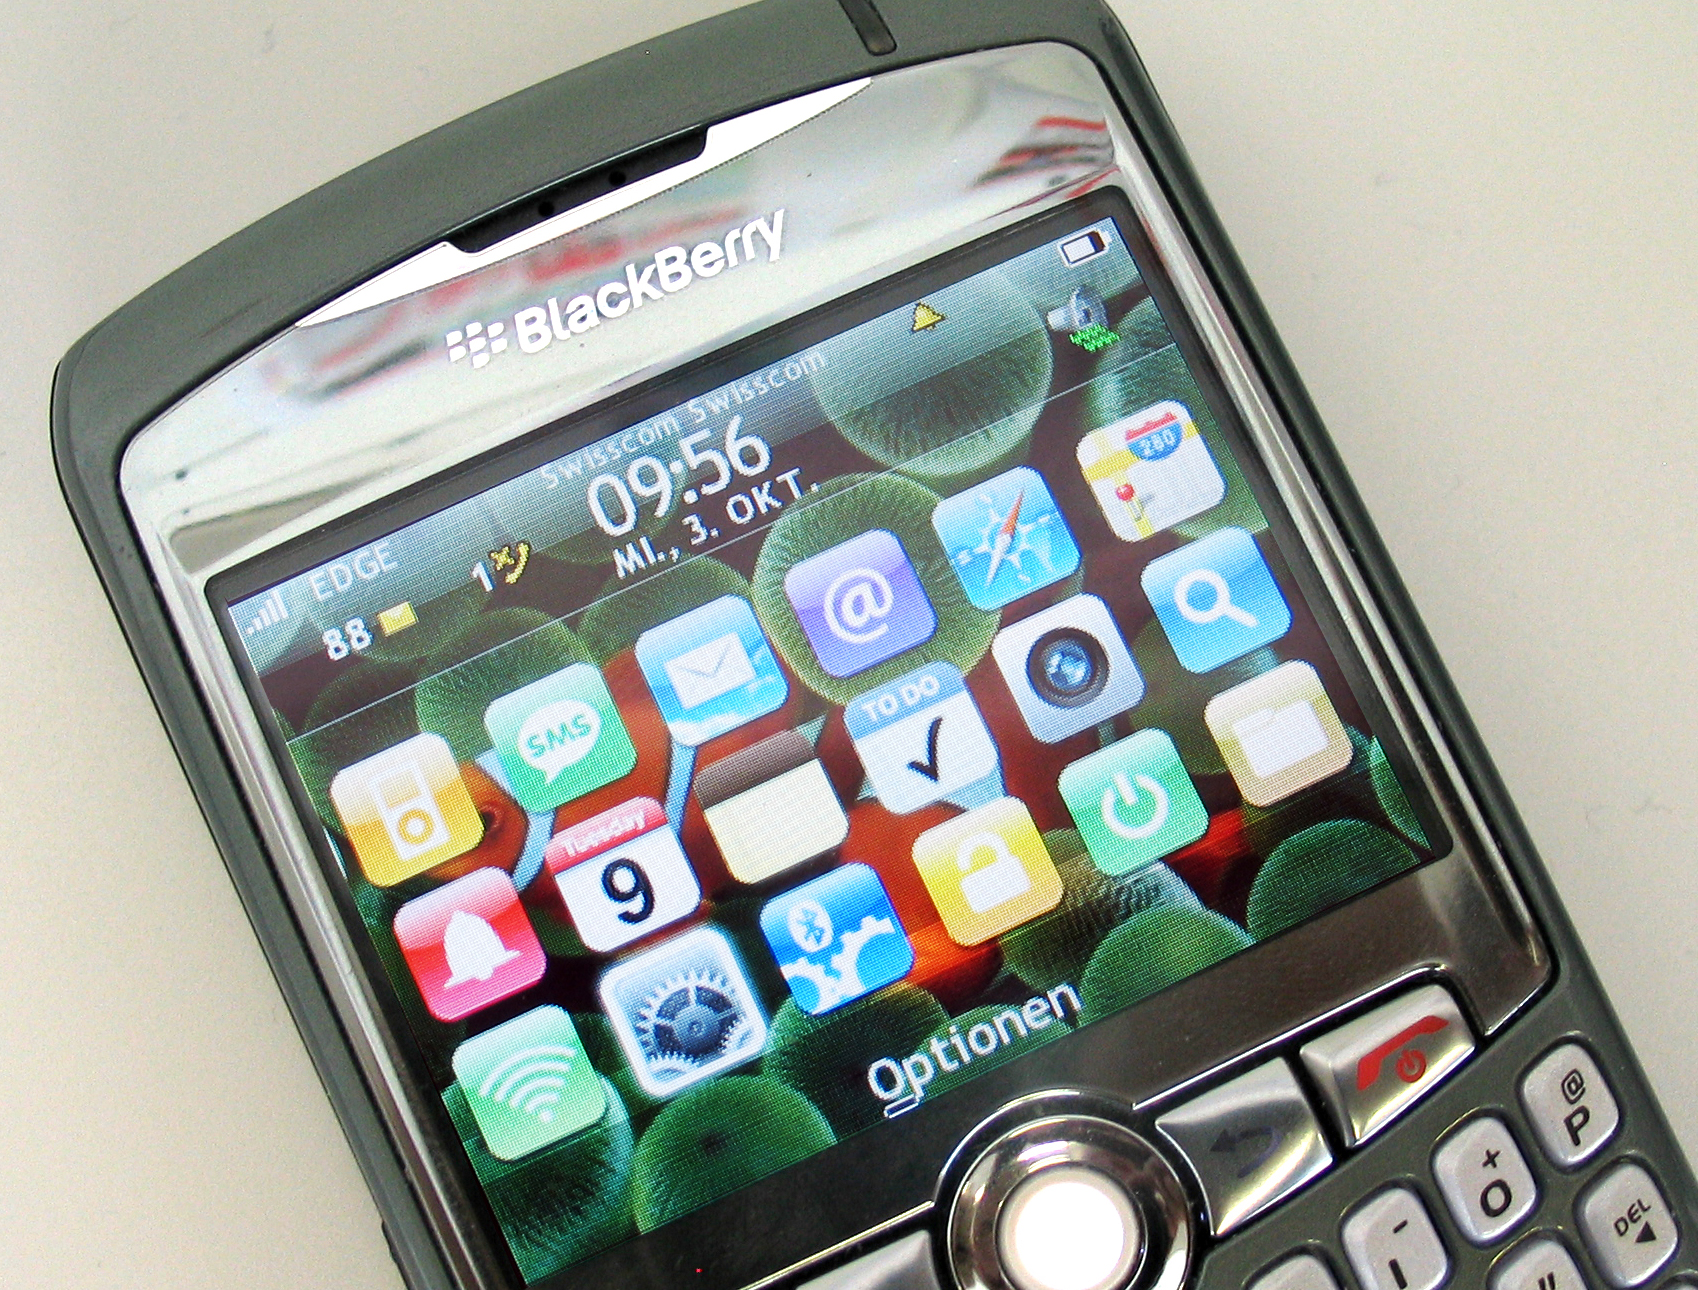 a cellphone has the theme blackberry on screen